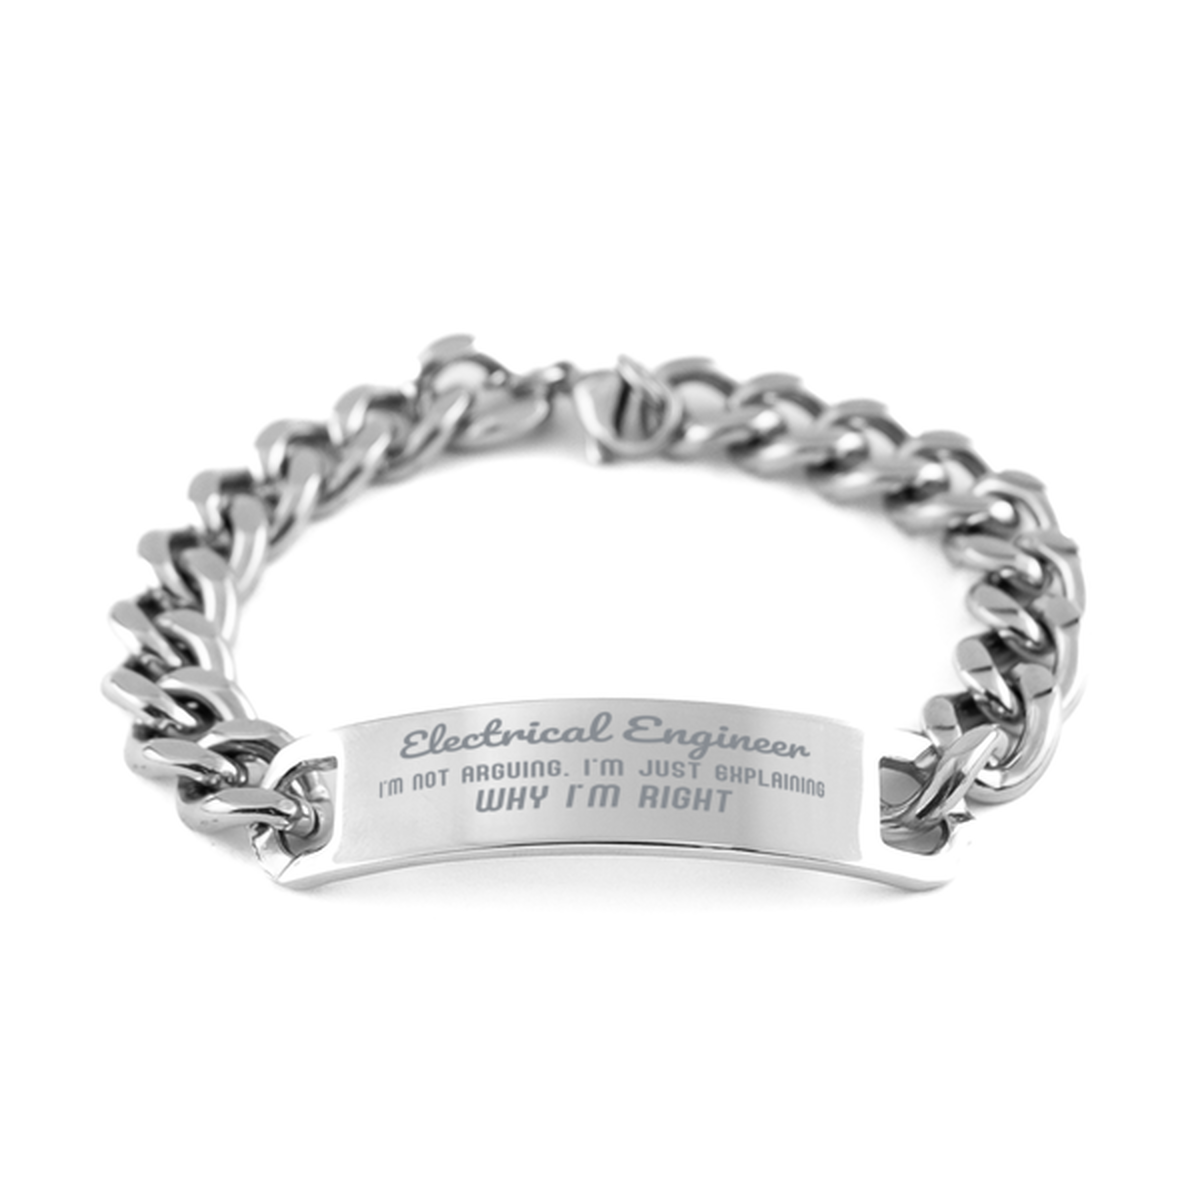 Electrical Engineer I'm not Arguing. I'm Just Explaining Why I'm RIGHT Cuban Chain Stainless Steel Bracelet, Graduation Birthday Christmas Electrical Engineer Gifts For Electrical Engineer Funny Saying Quote Present for Men Women Coworker